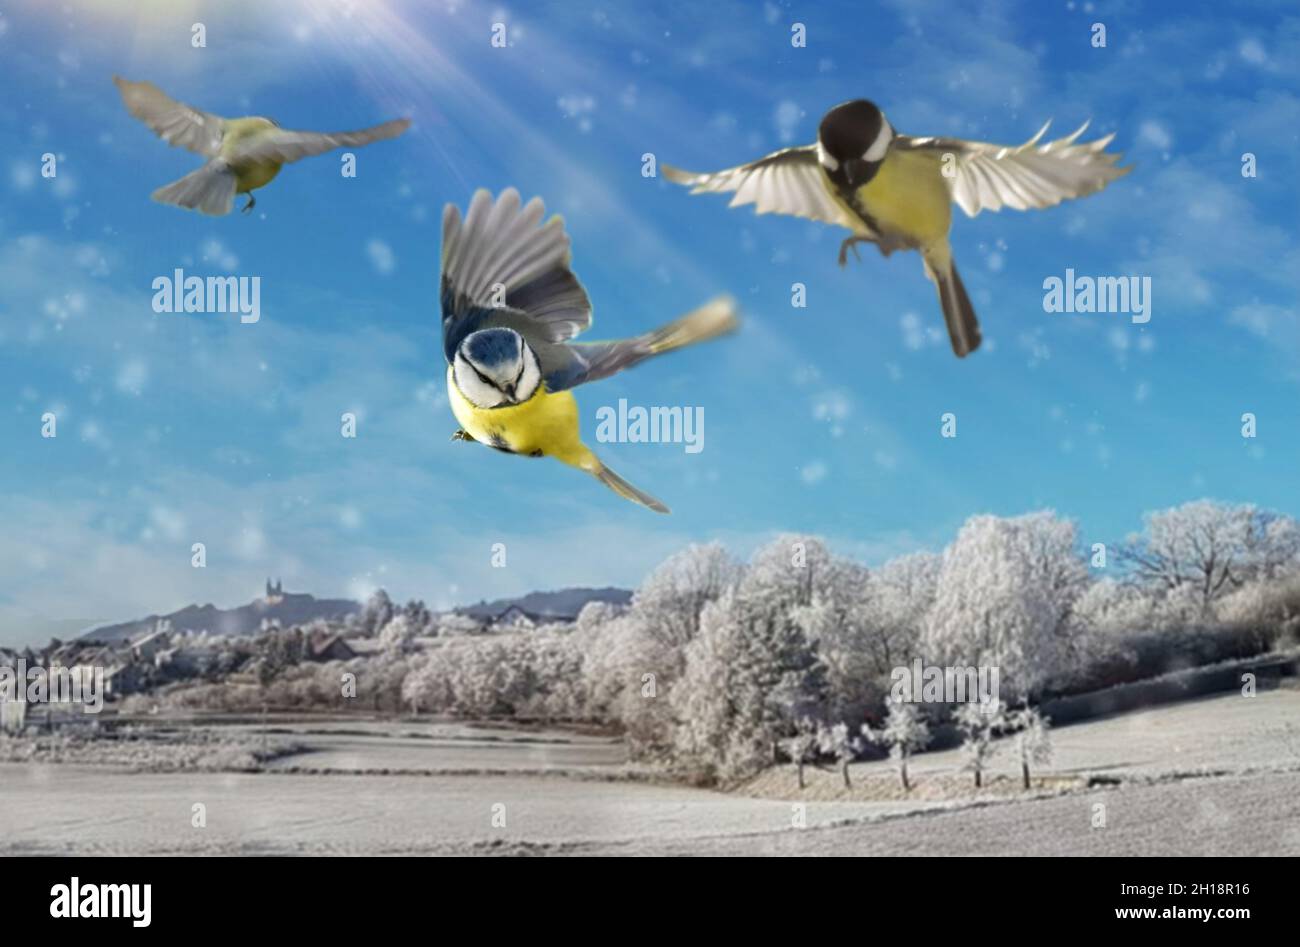 Native bird species in the air while flying Stock Photo